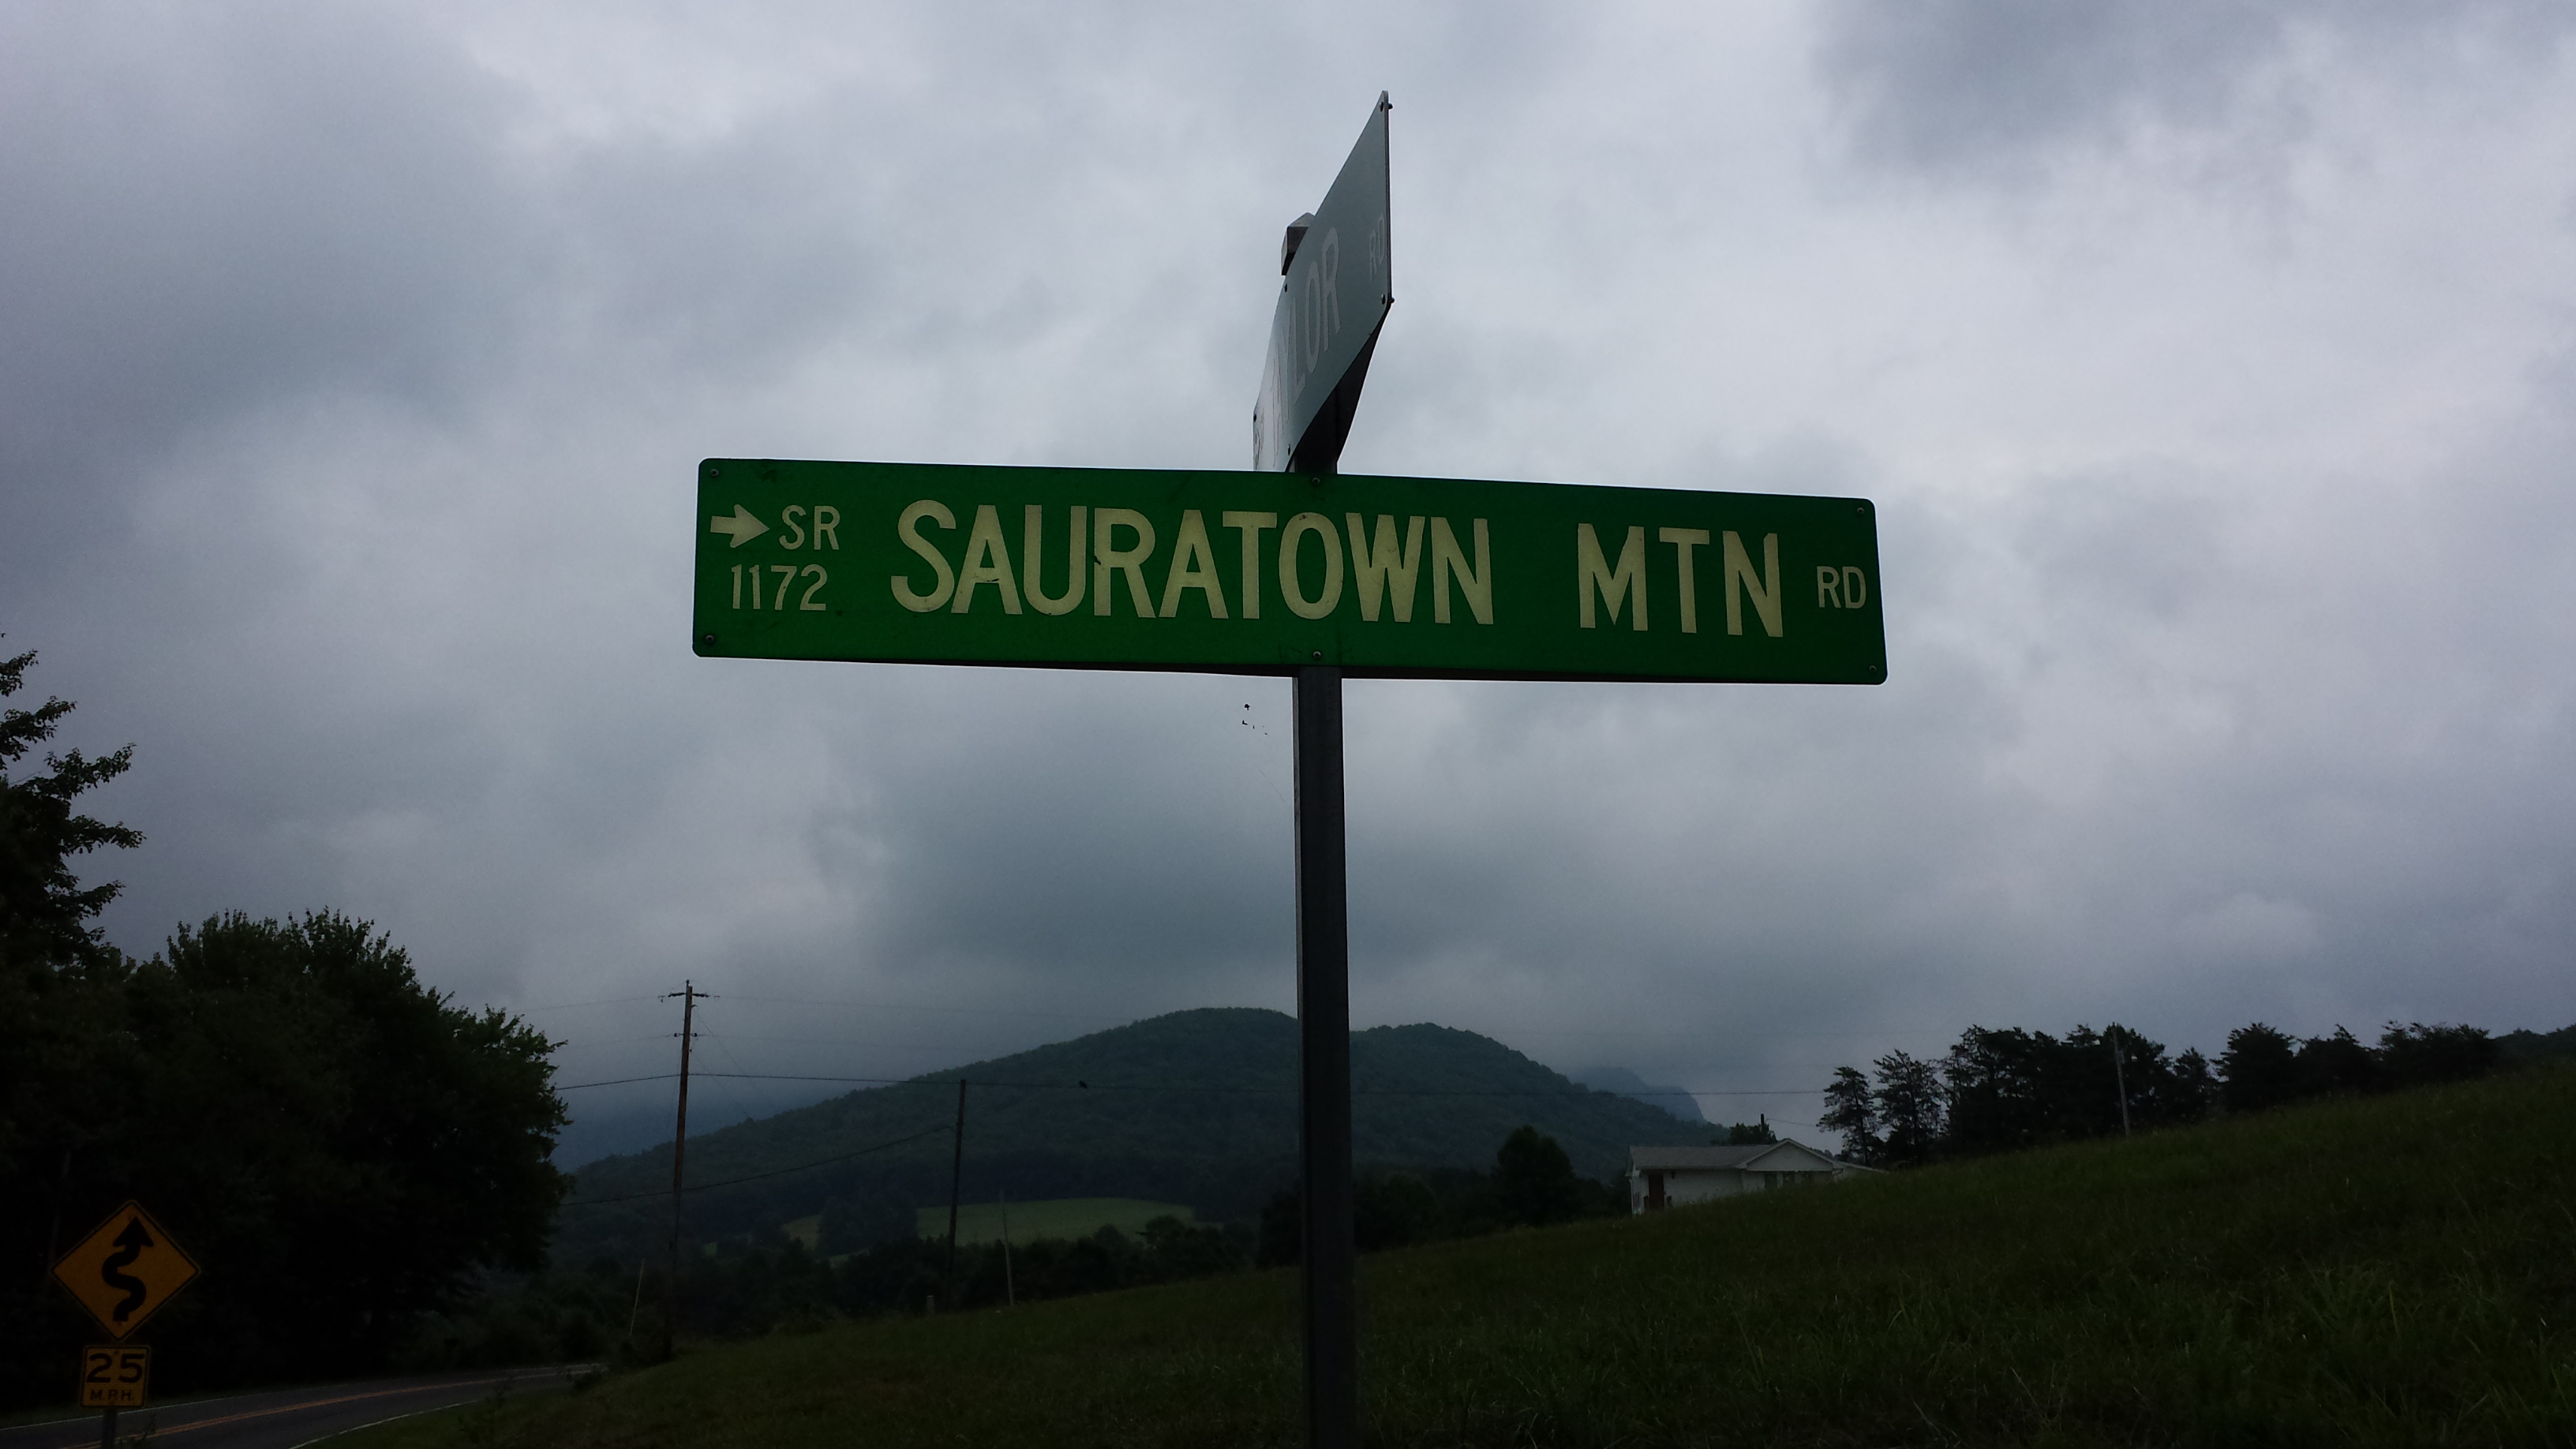 The base of the climb up Sauratown